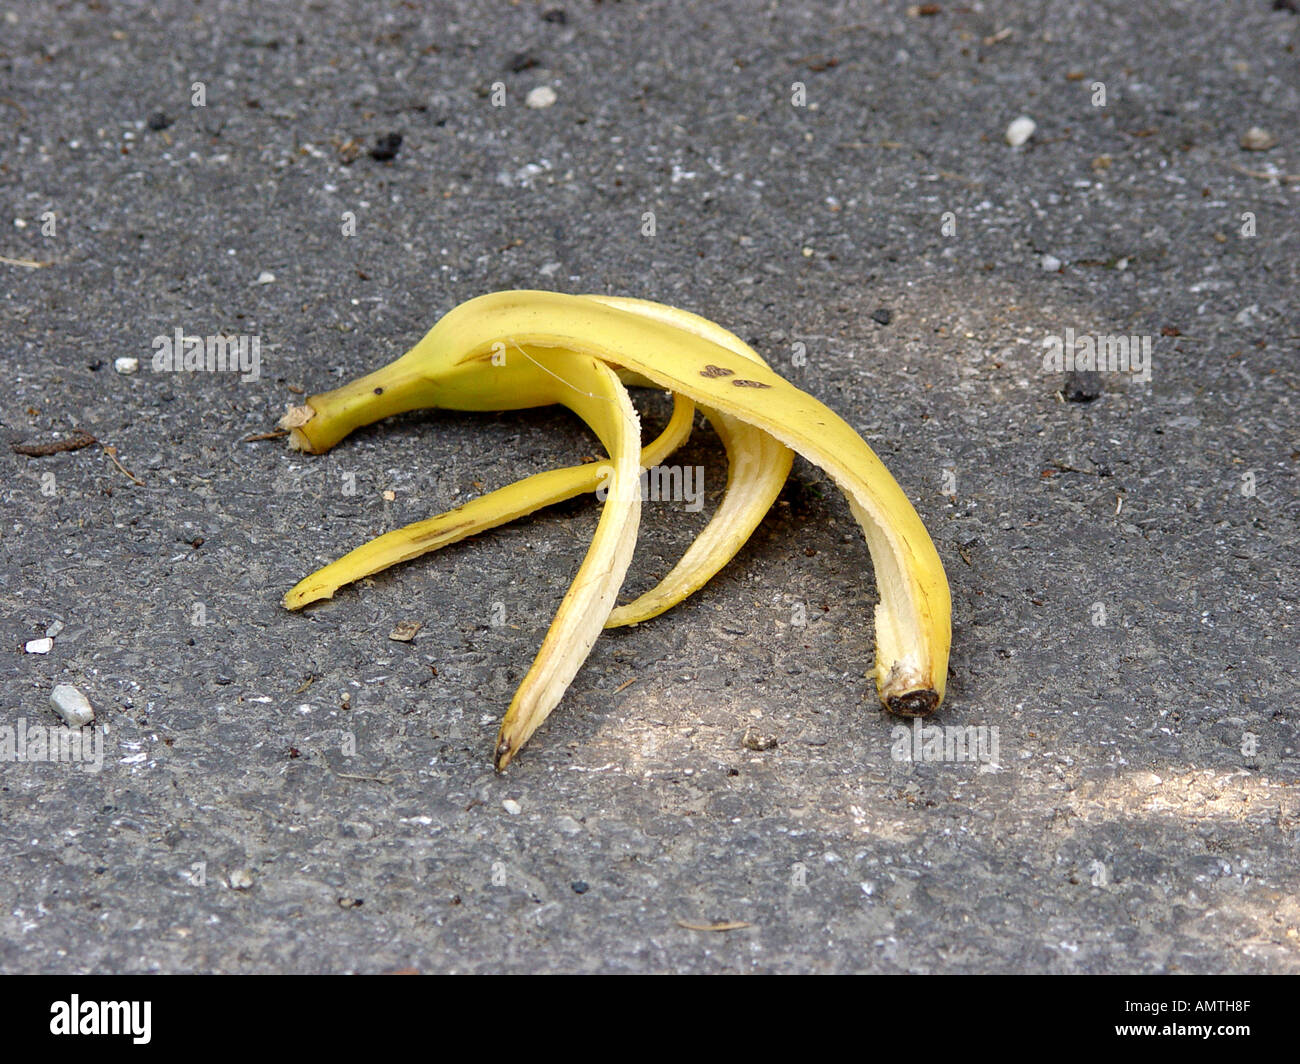 Banana skin on the road as symbol for slipping falling down etc  Stock Photo